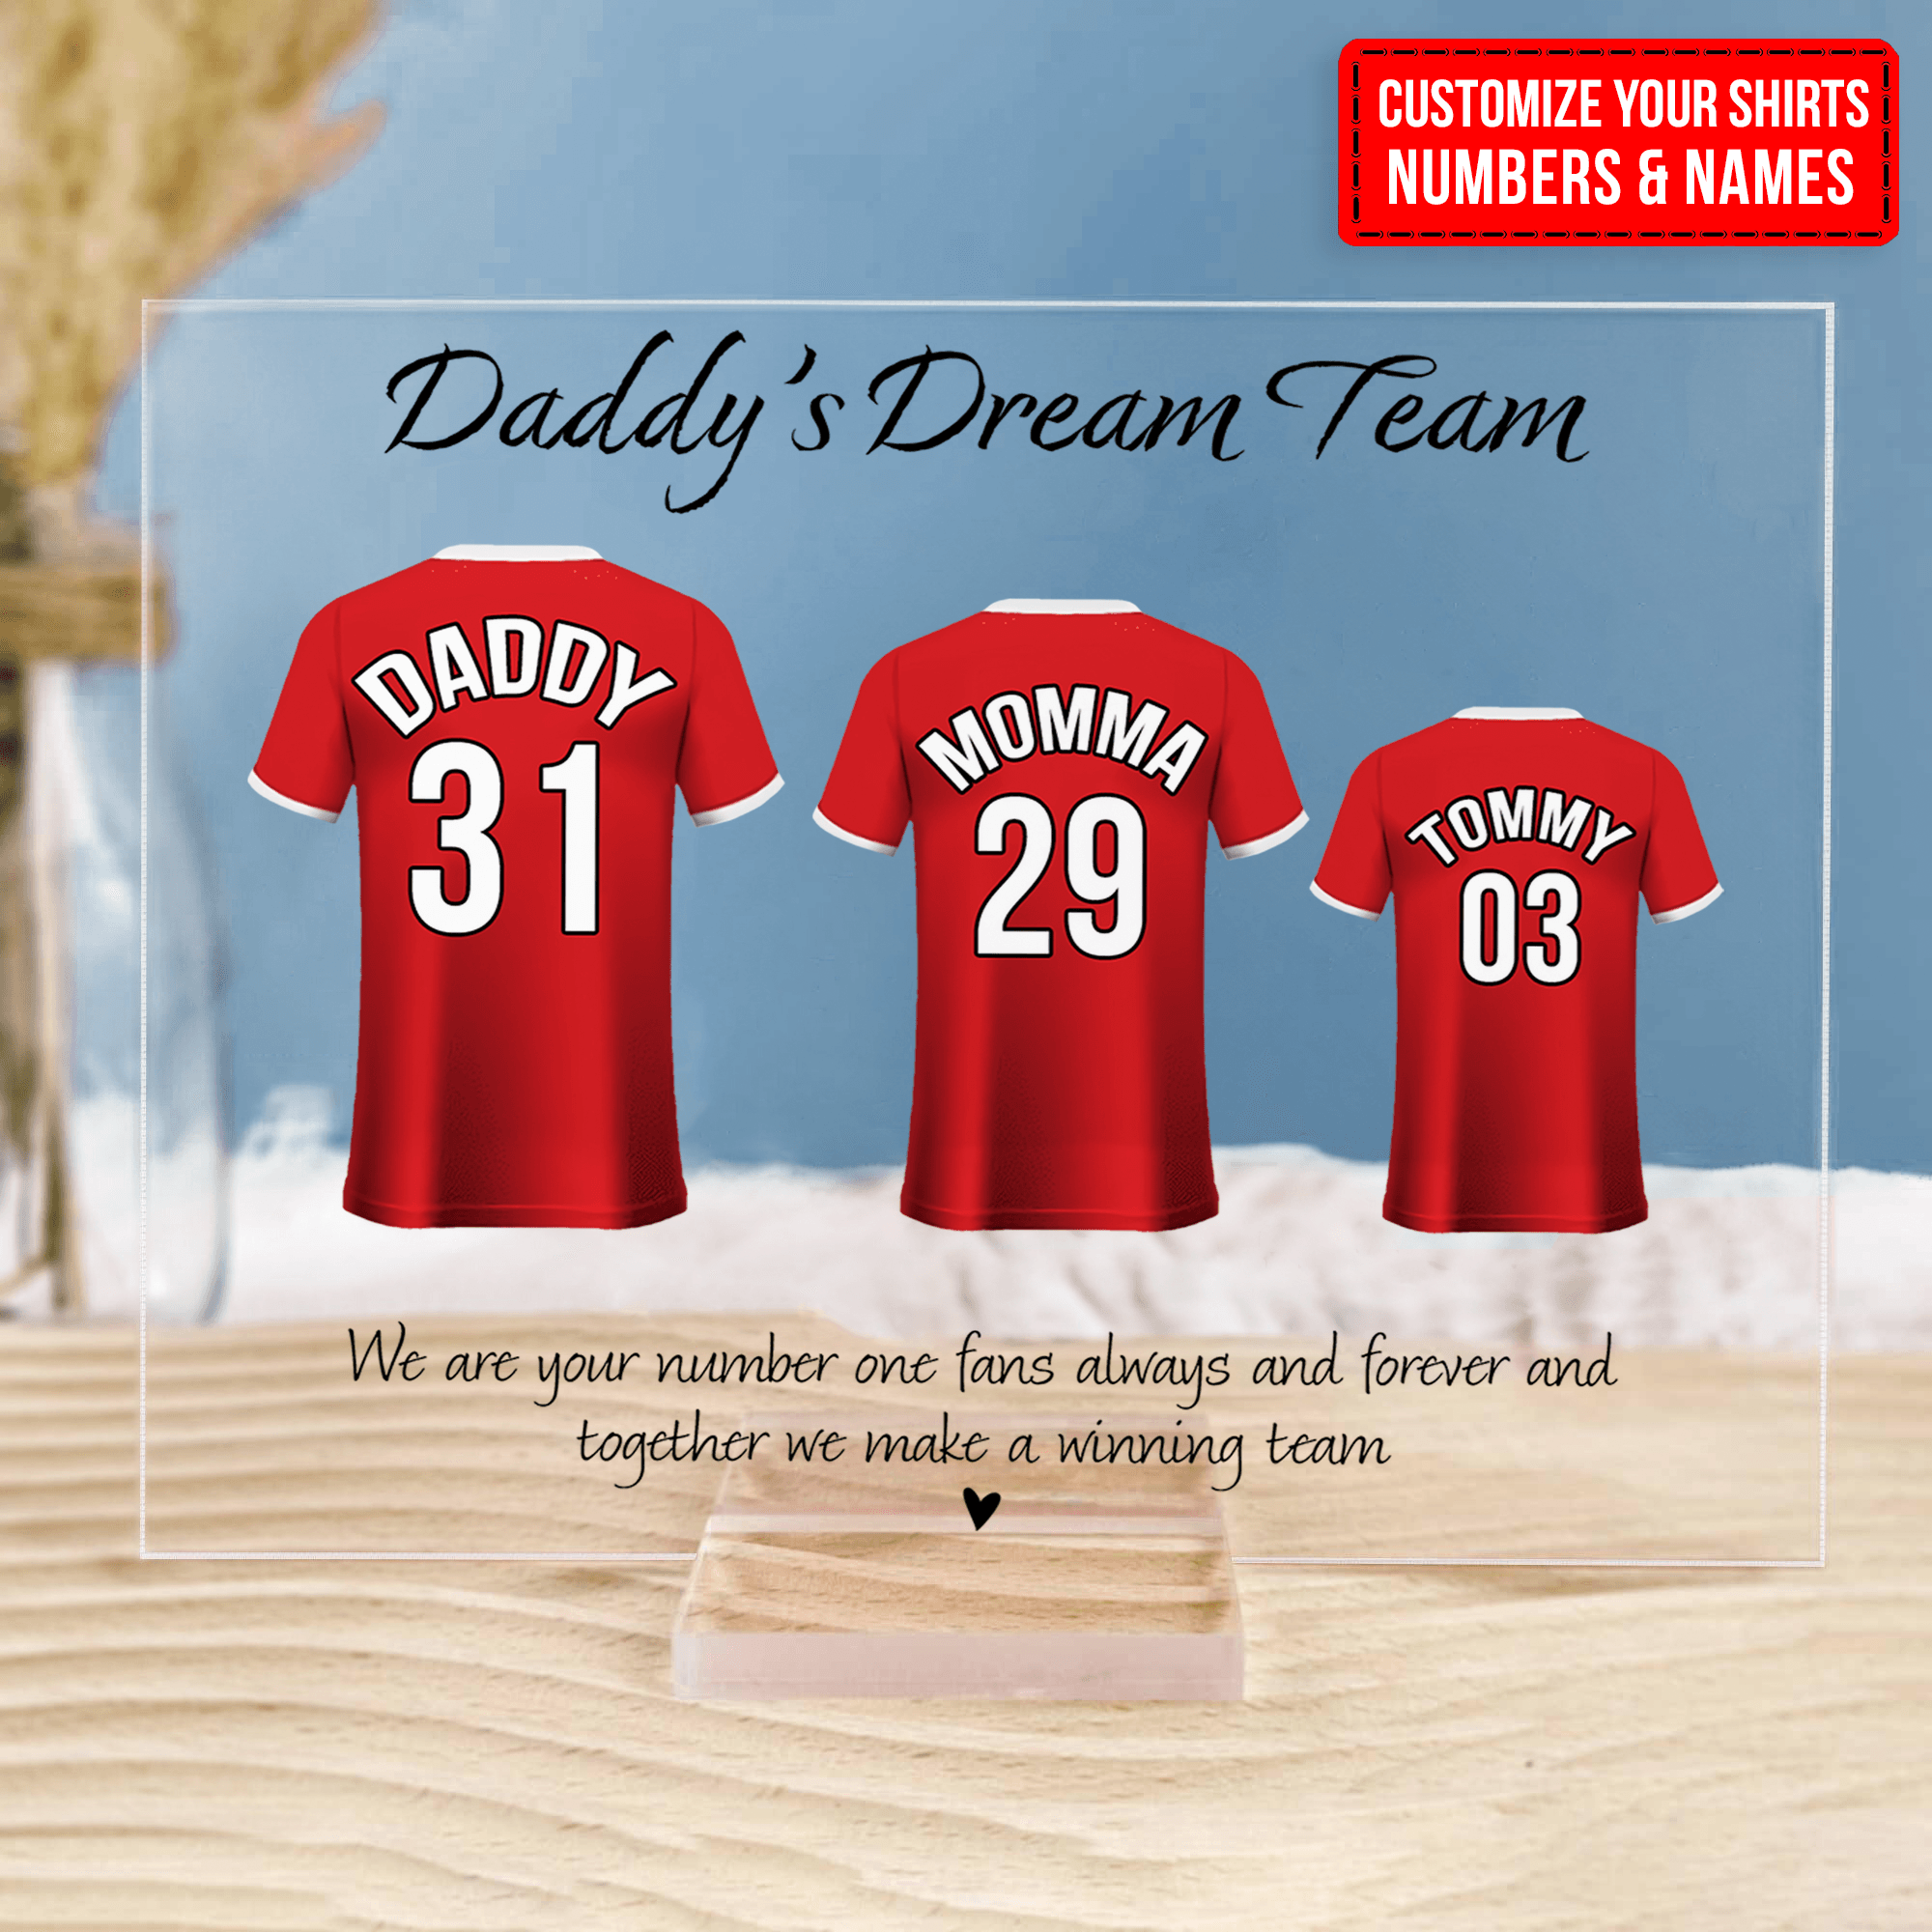 Daddy's Dream Team Football Team - Fathers Day - Personalized Custom Horizontal Acrylic Plaque - Birthday, Loving, Funny Gift for Family, Grandfather/Dad/Father, Husband, Grandparent - Suzitee Store